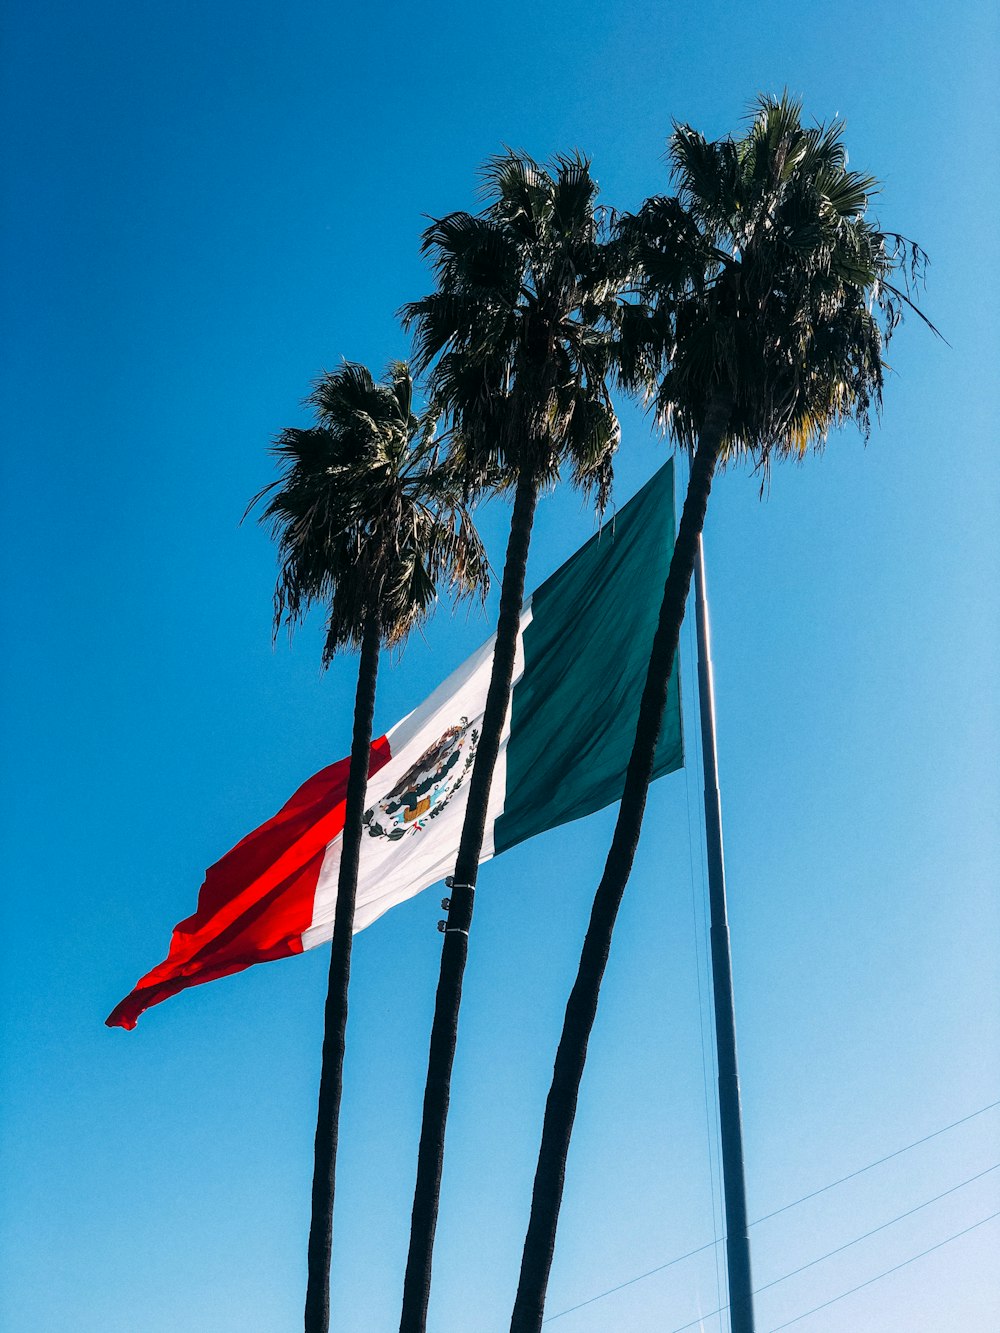 a flag flying between two palm trees on a sunny day